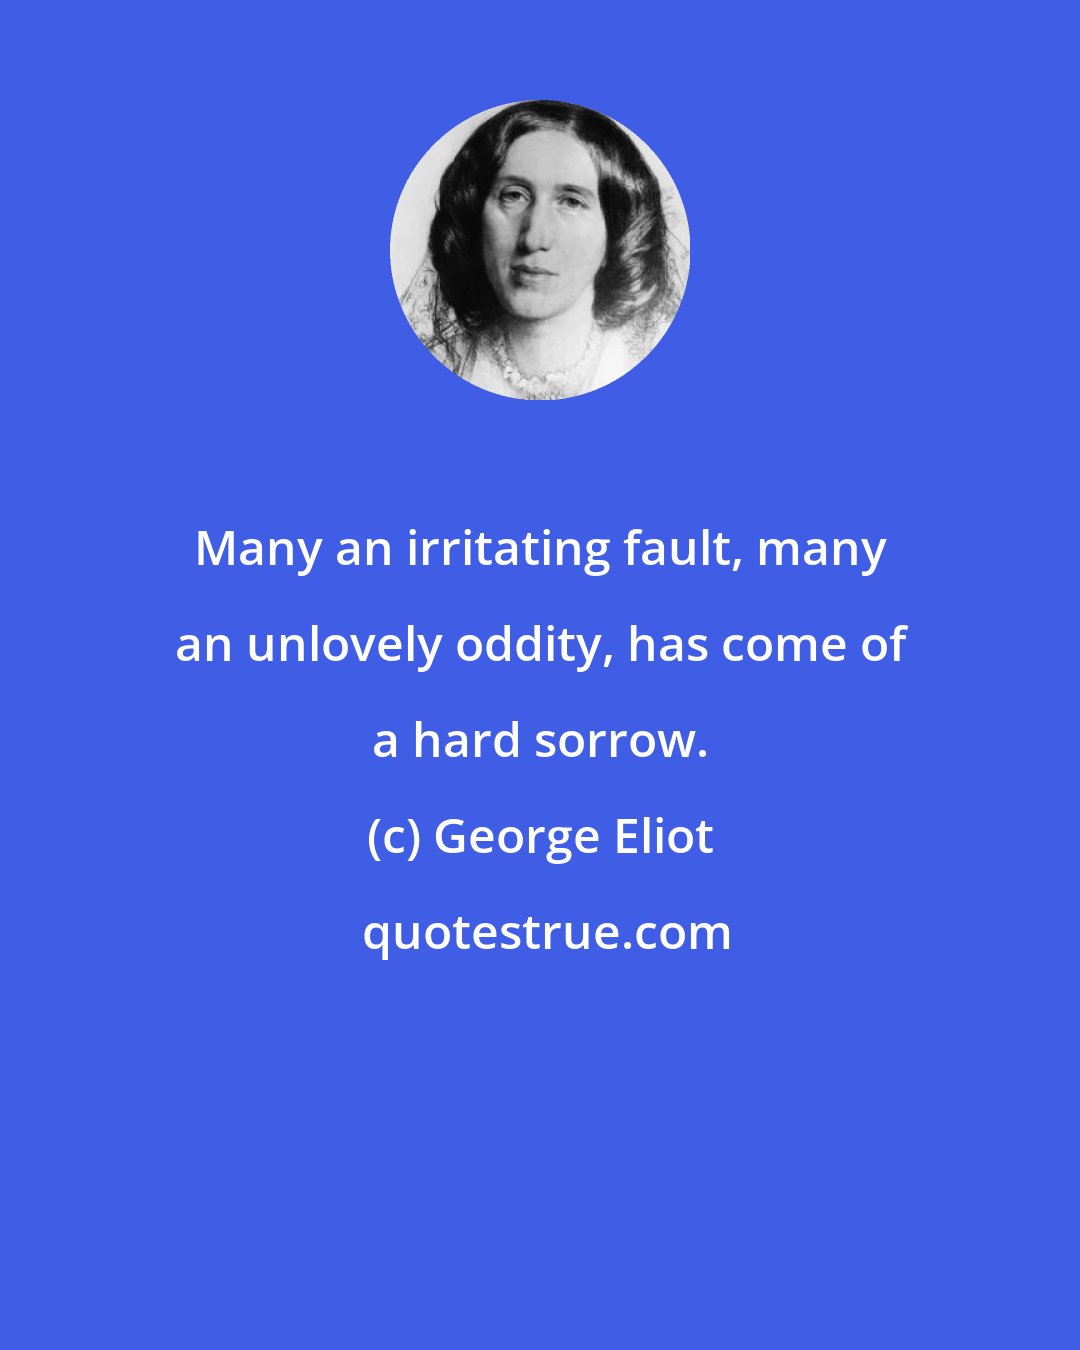 George Eliot: Many an irritating fault, many an unlovely oddity, has come of a hard sorrow.